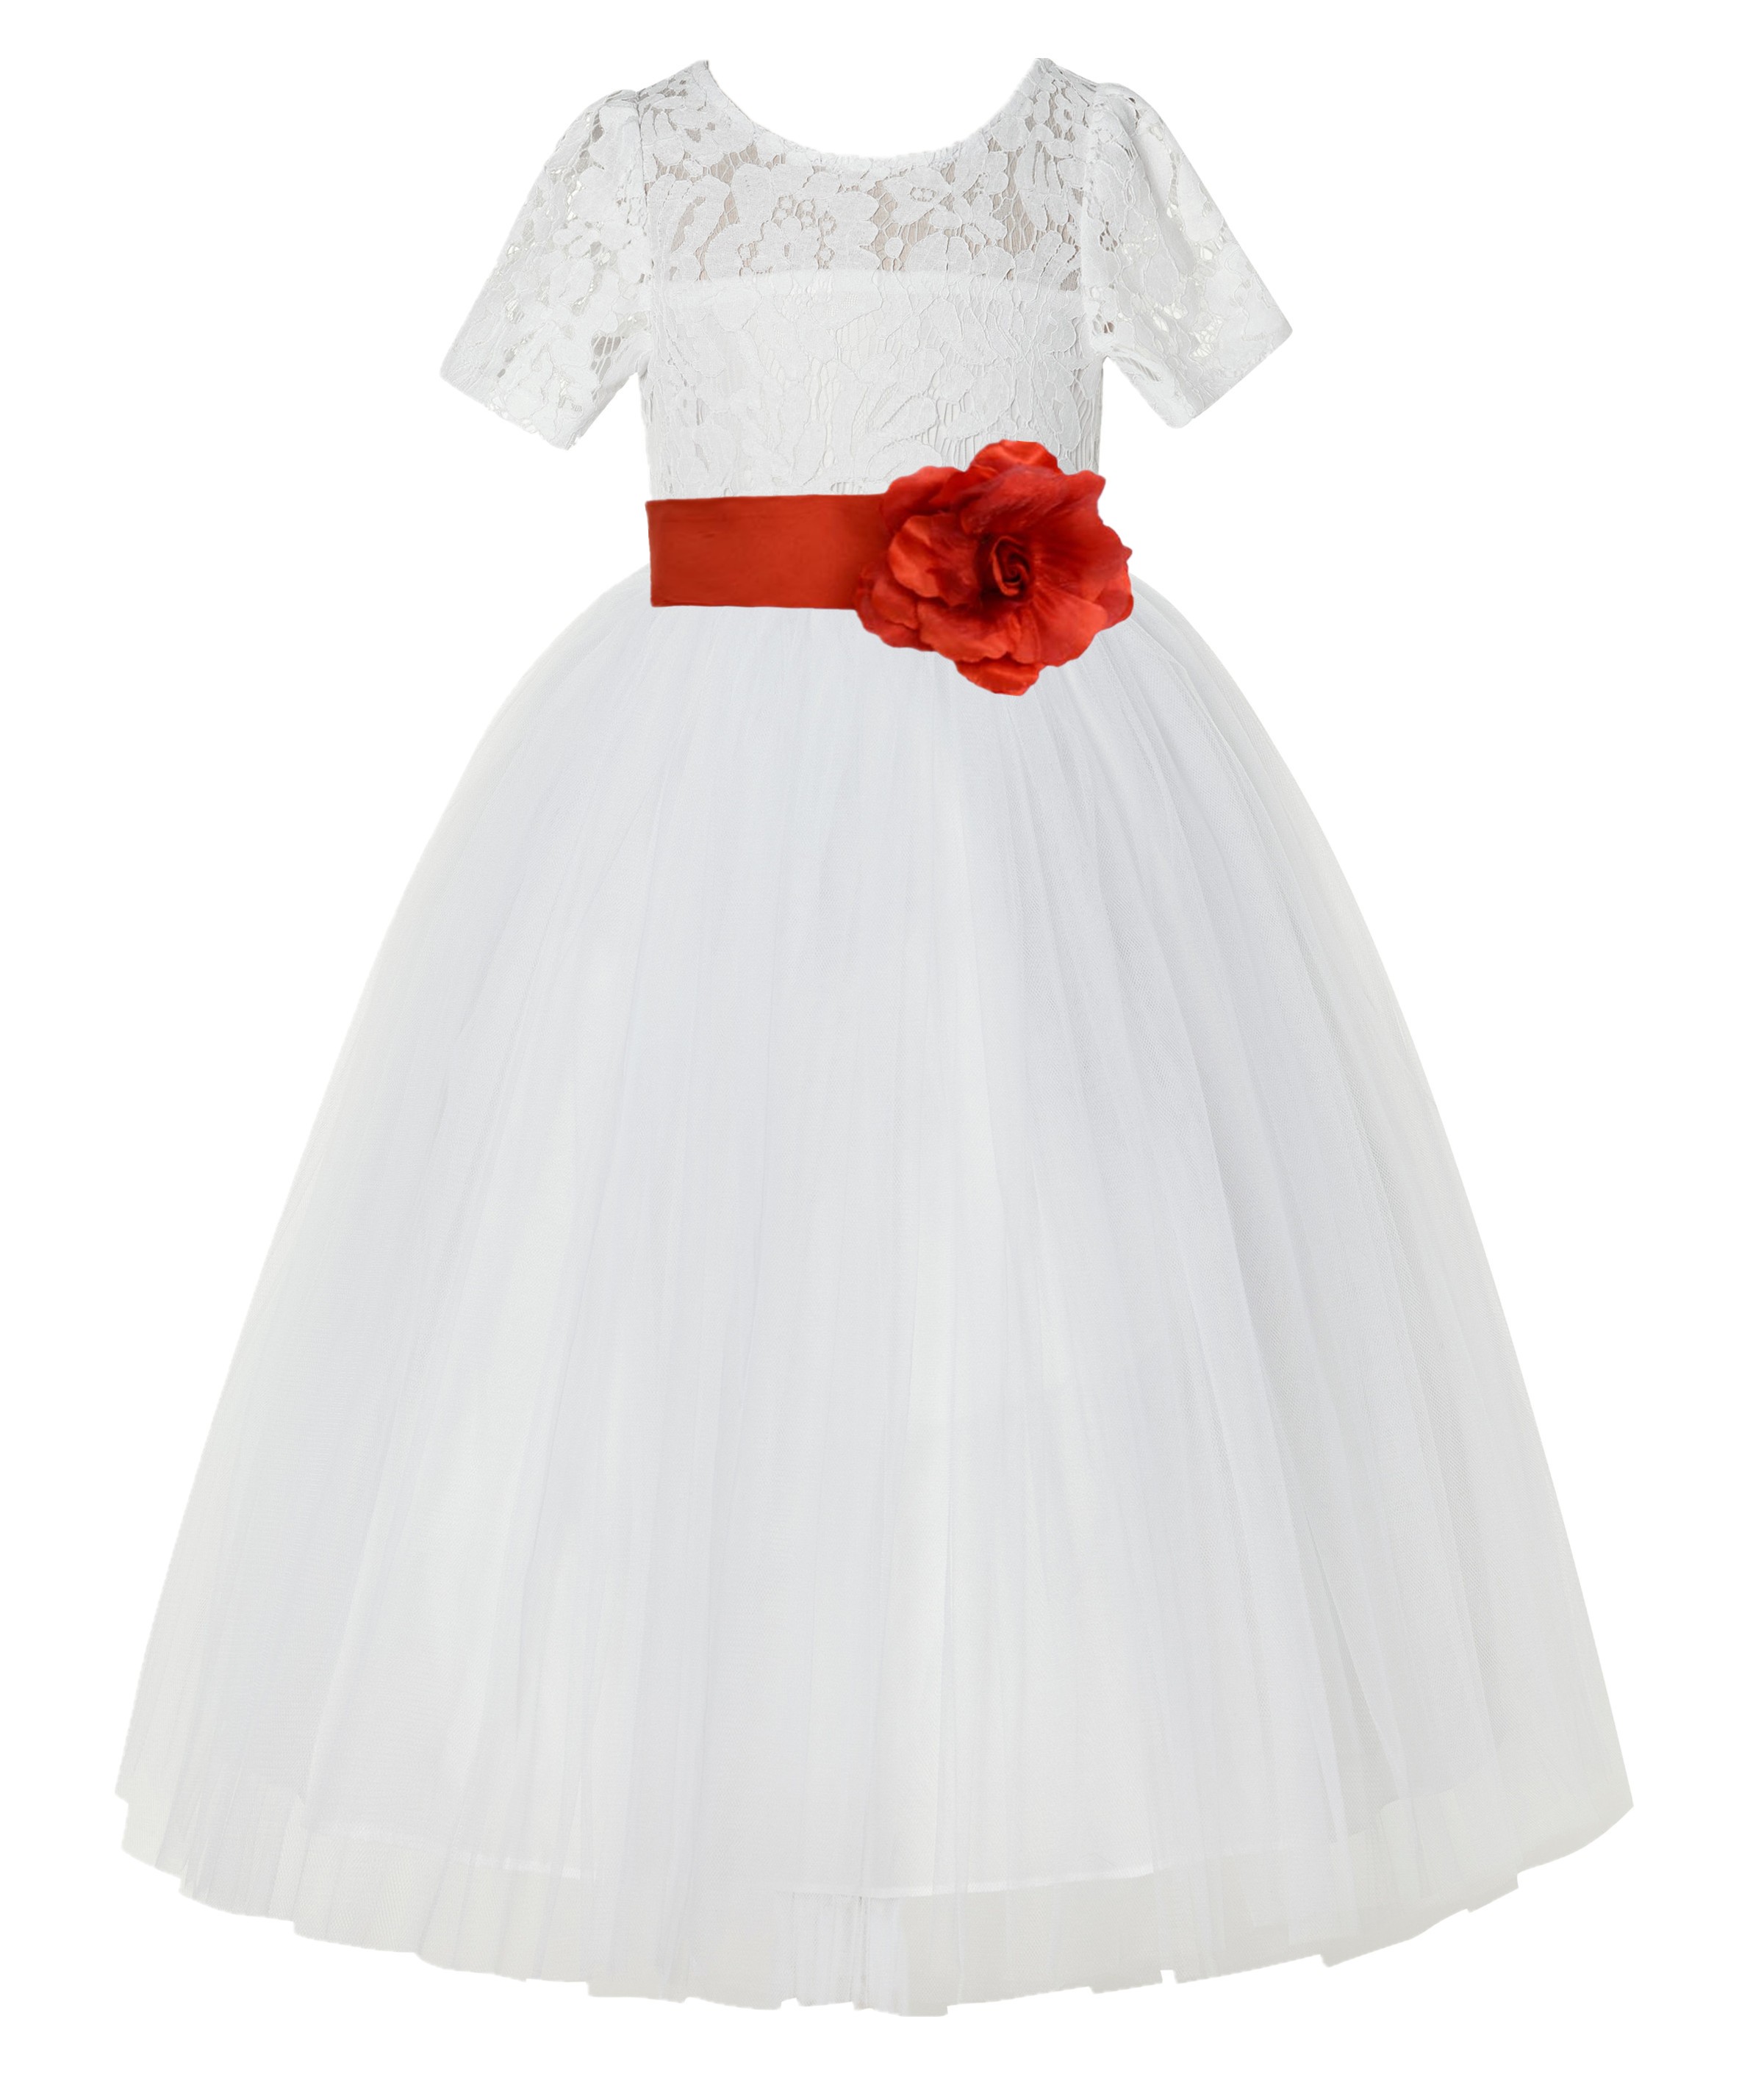 Ivory / Persimmon Red Floral Lace Flower Girl Dress Vintage Dress LG2